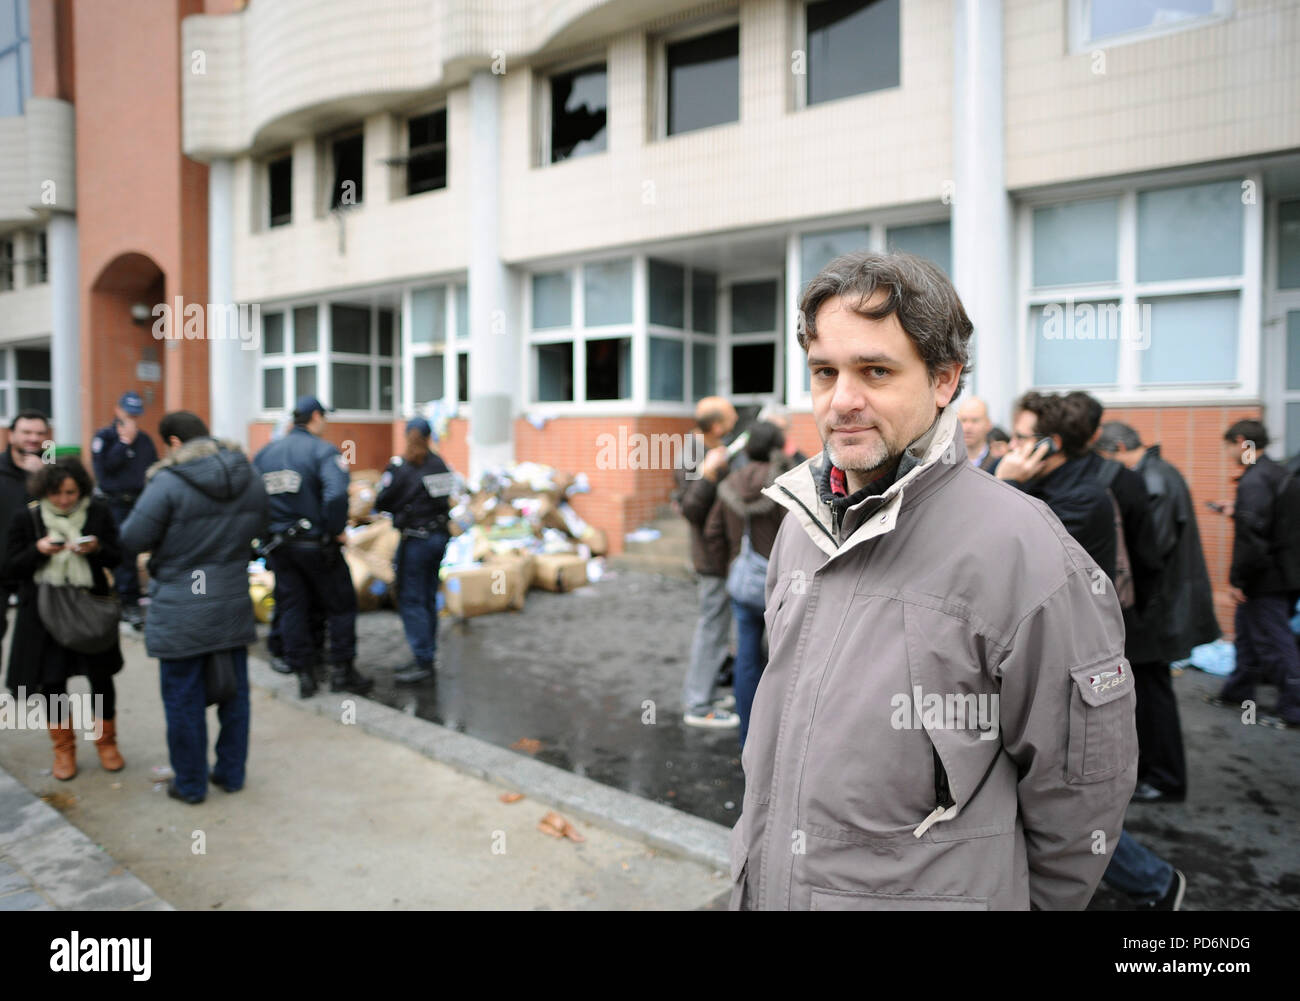 November 2, 2011 - Paris, France: One of the star cartoonist of Charlie Hebdo, Laurent Sourisseau, known as 'Riss',  stands in front of the gutted office of French satirical weekly paper Charlie Hebdo after an overnight petrol bomb attack. The paper was targeted after publishing a caricature of prophet Muhammad on its front cover for a special issue entitled 'Shariah Hebdo'.  Le dessinateur Laurent Sourisseau, dit Riss, devant les locaux de Charlie Hebdo apres qu'une attaque au cocktail molotov a declenche un incendie et detruit les locaux boulevard Davout de l'hebdomadaire satirique. Cette at Stock Photo